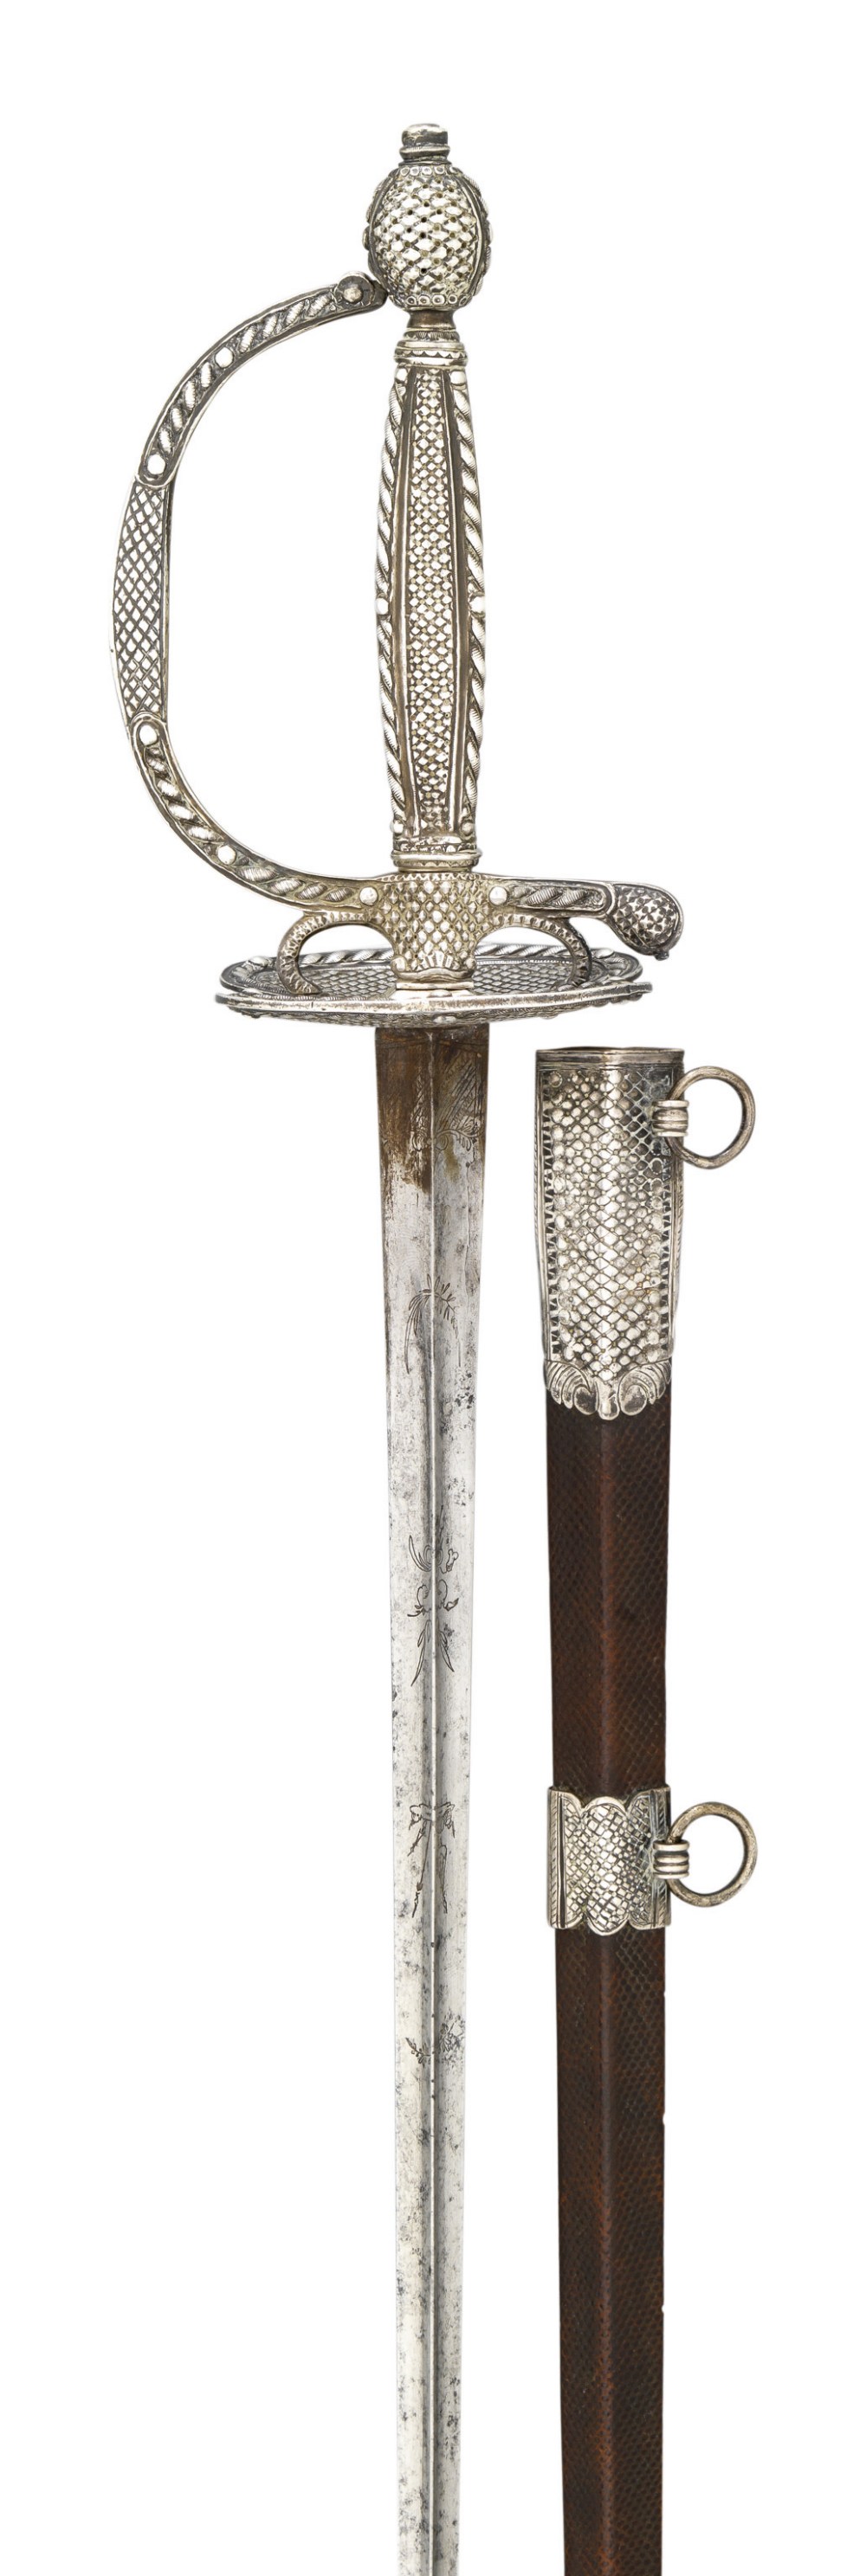 A CONTINENTAL SILVER-HILTED SMALL-SWORD, CIRCA 1790 with hollow-triangular blade etched and gilt